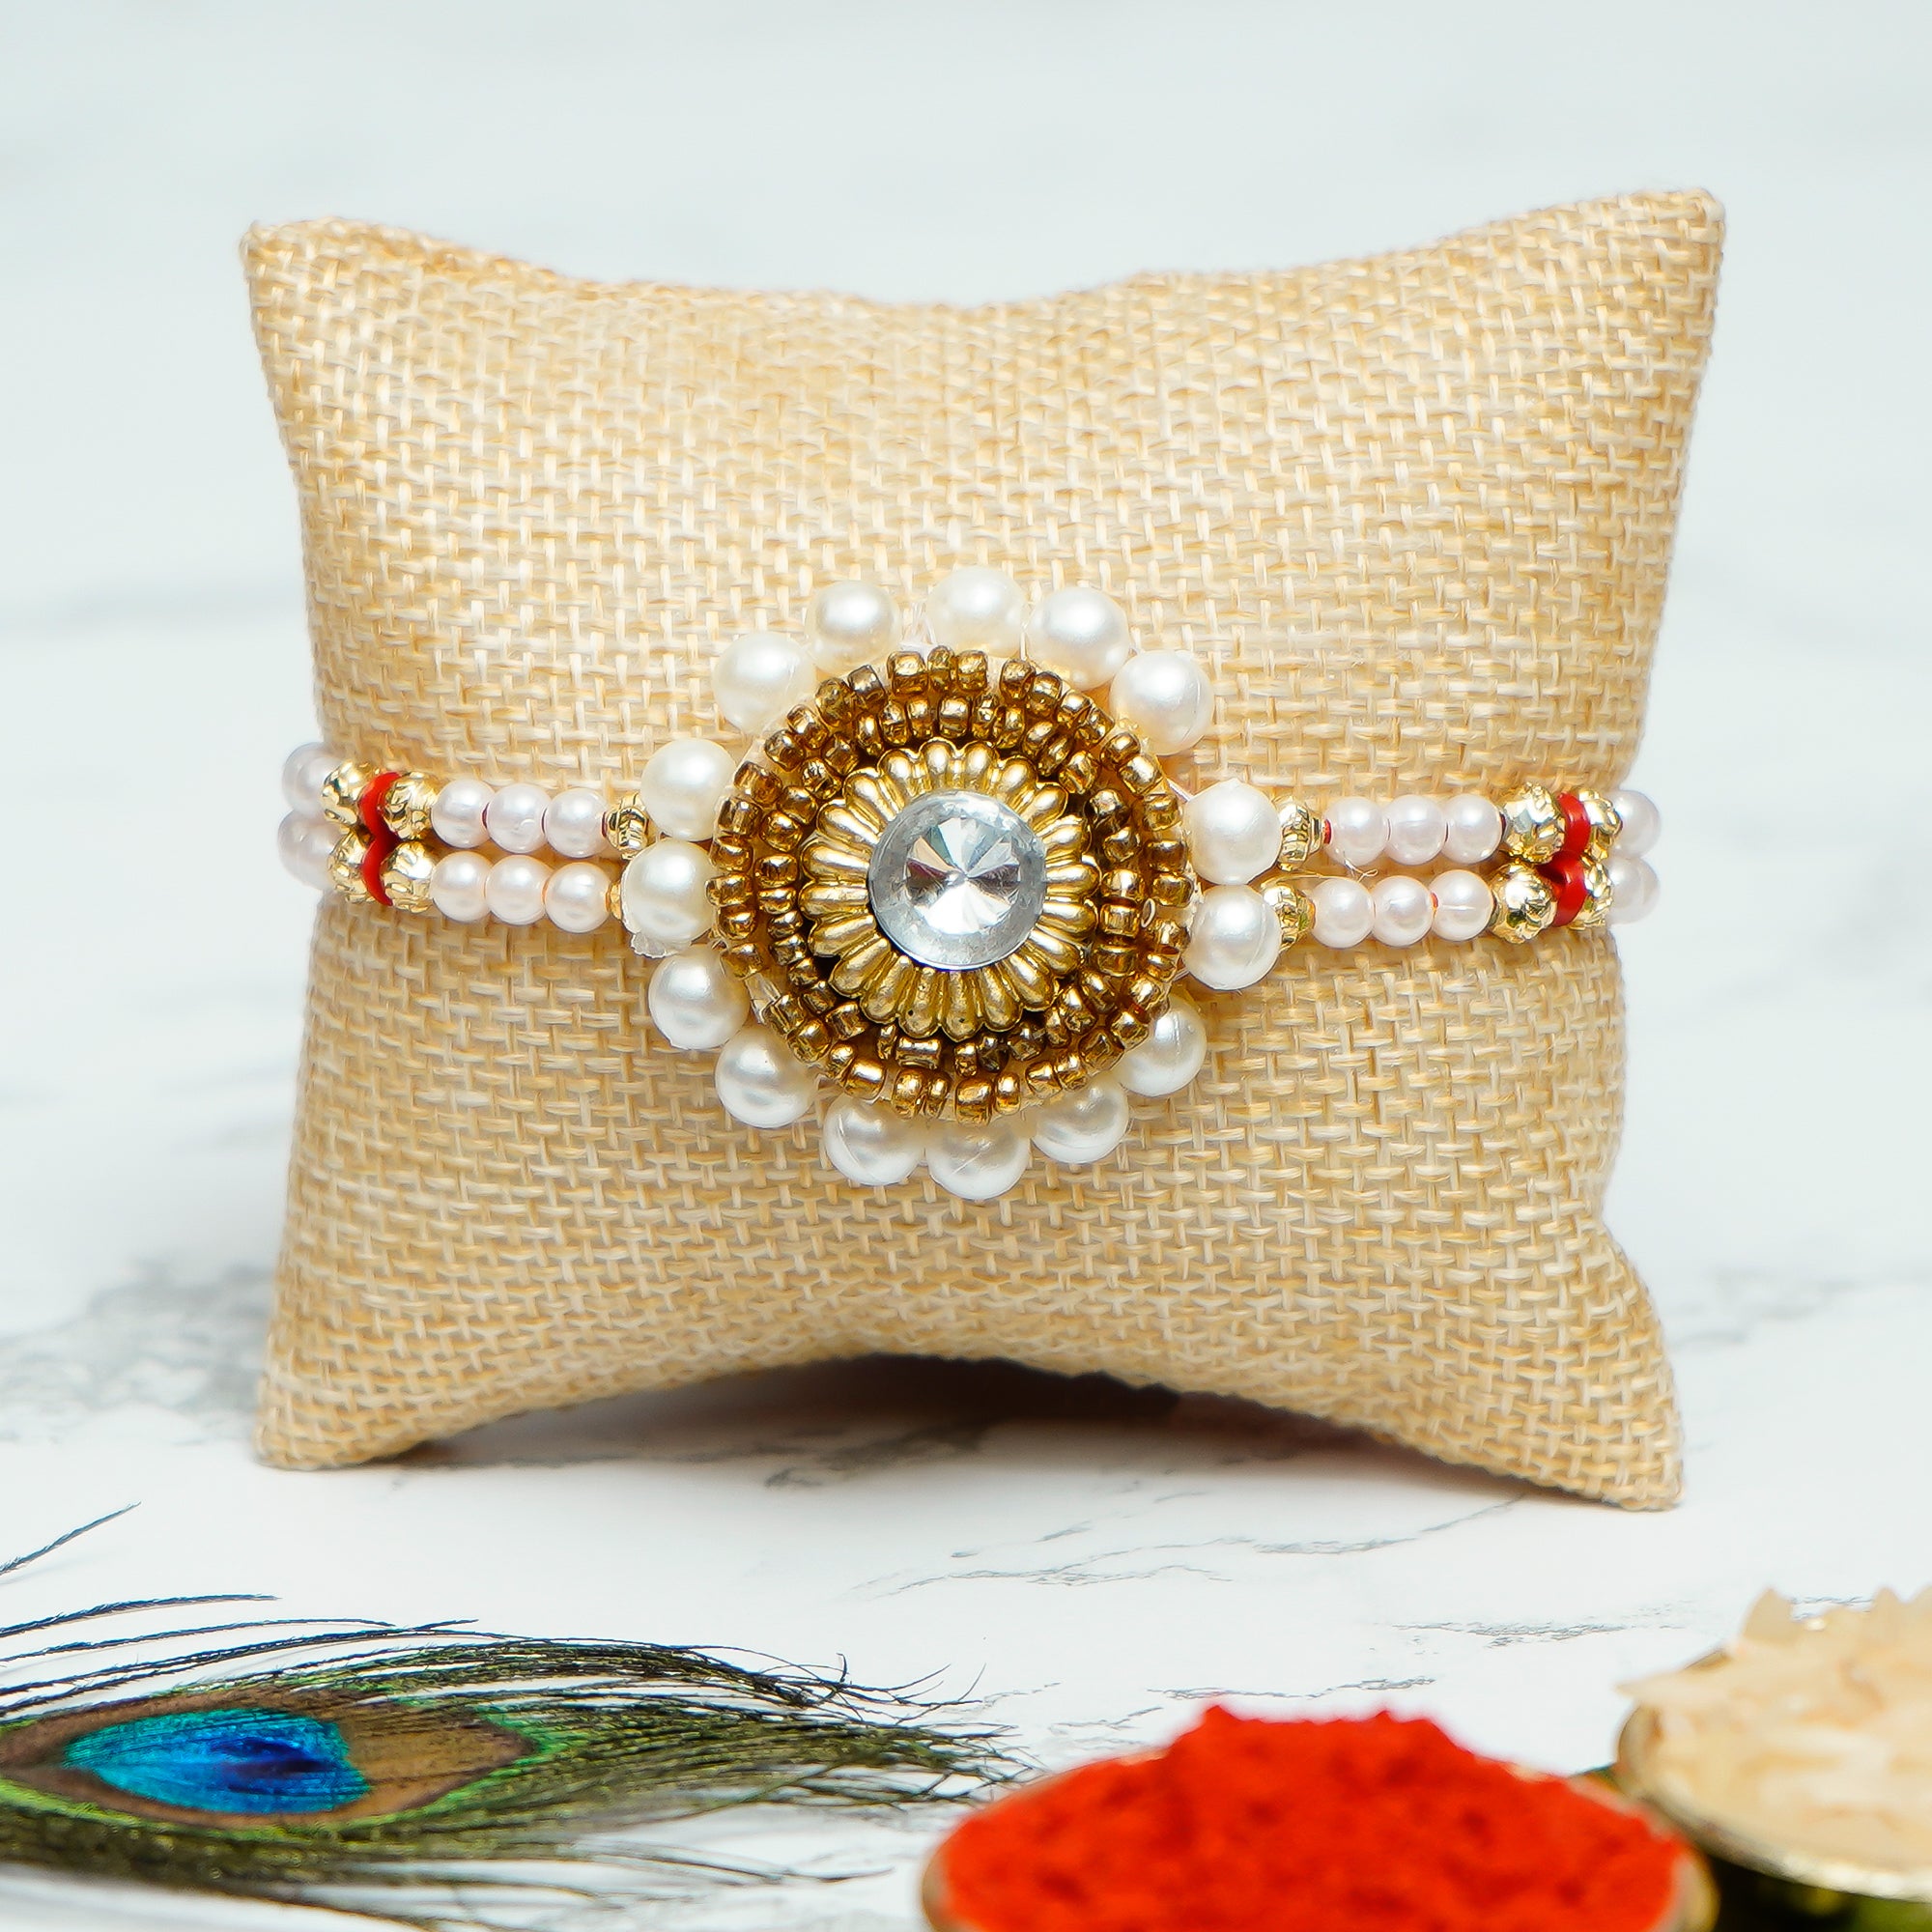 Designer Handcrafted Stone Pearl Rakhi with Golden Silver Handcrafted Palm Buddha Showpiece and Roli Chawal Pack, Best Wishes Greeting Card 1